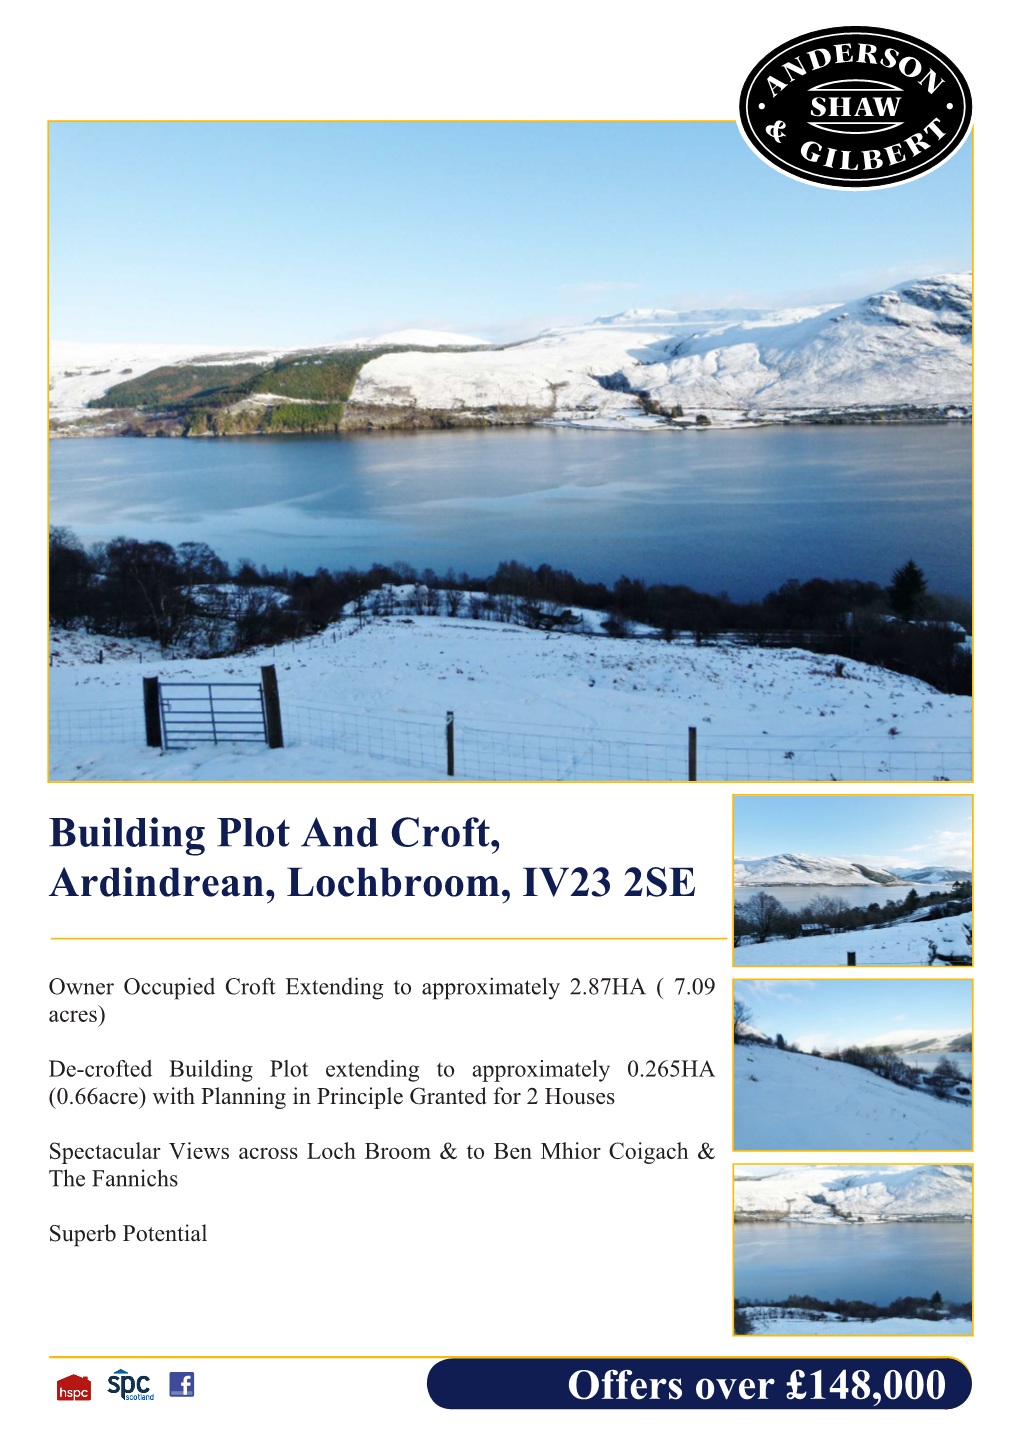 Offers Over £148,000 Building Plot and Croft, Ardindrean, Lochbroom